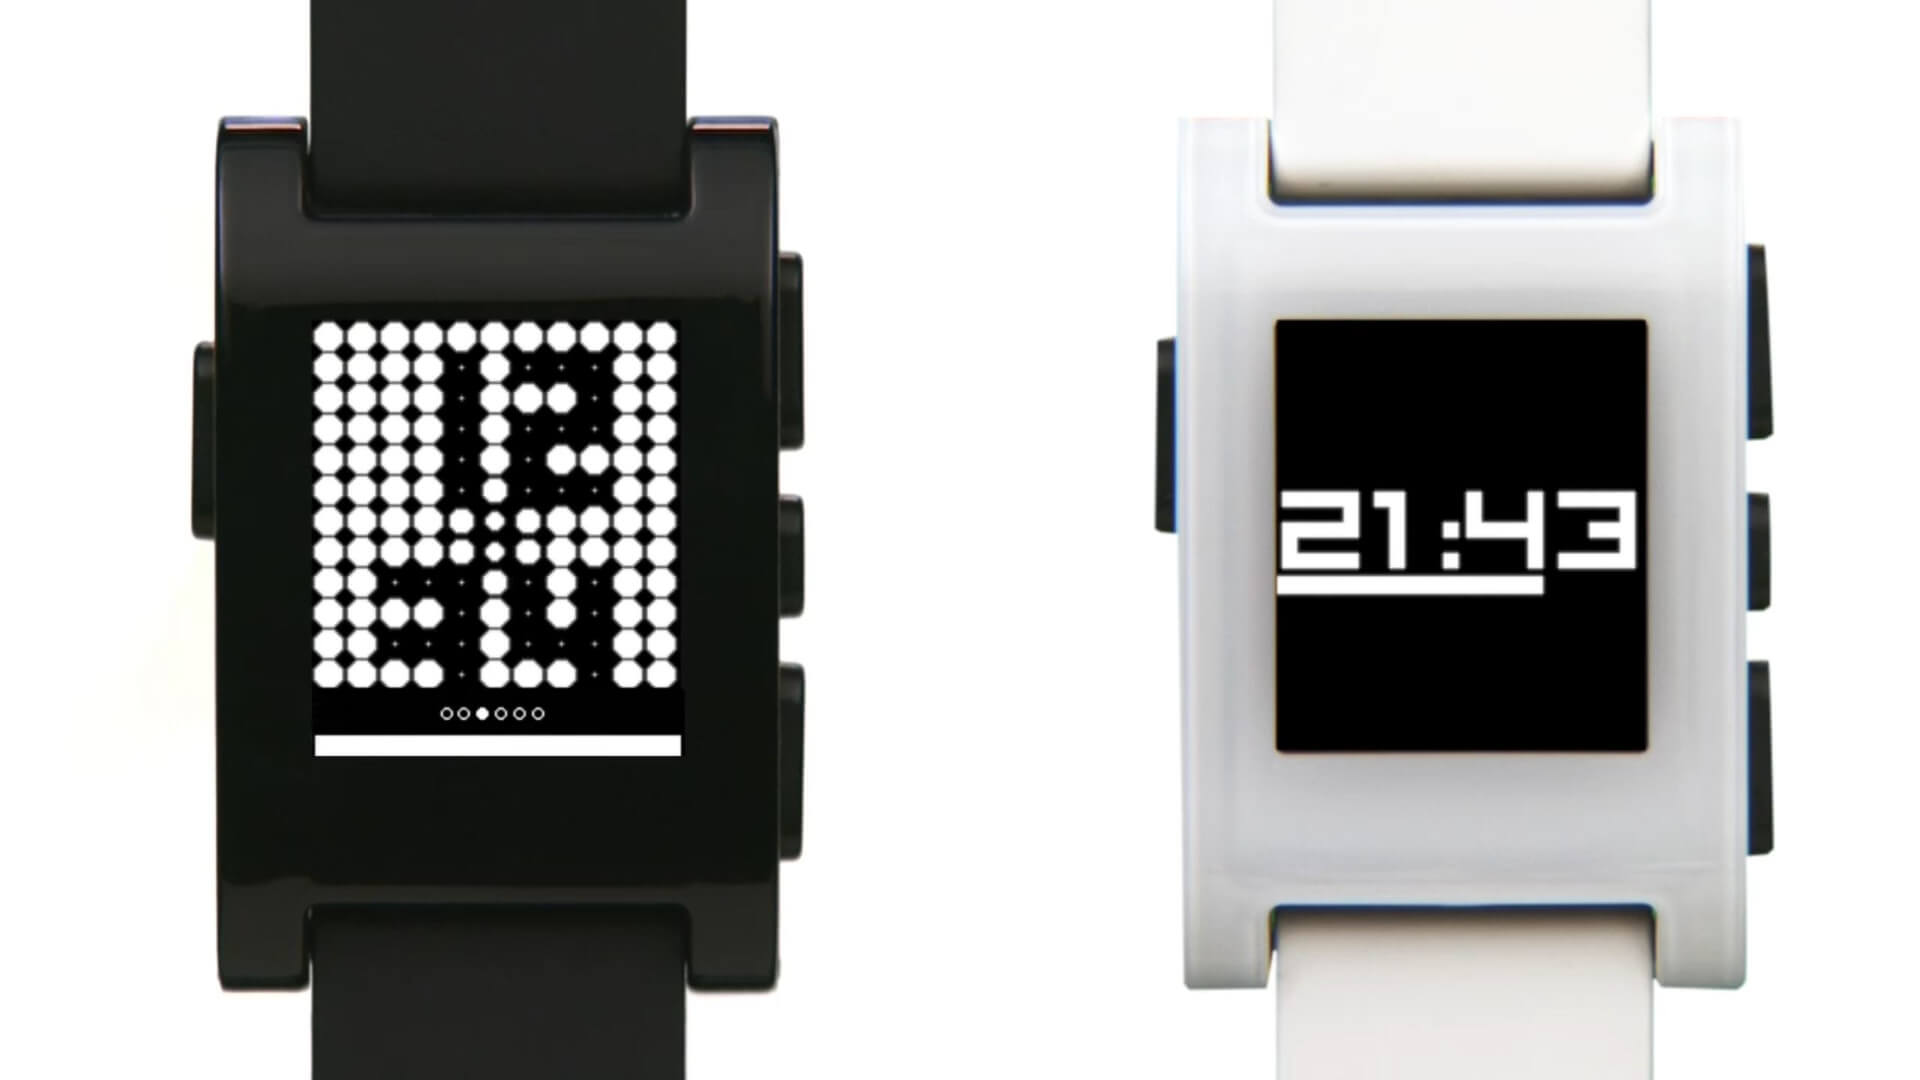 Two Pebble smartwatches side by side